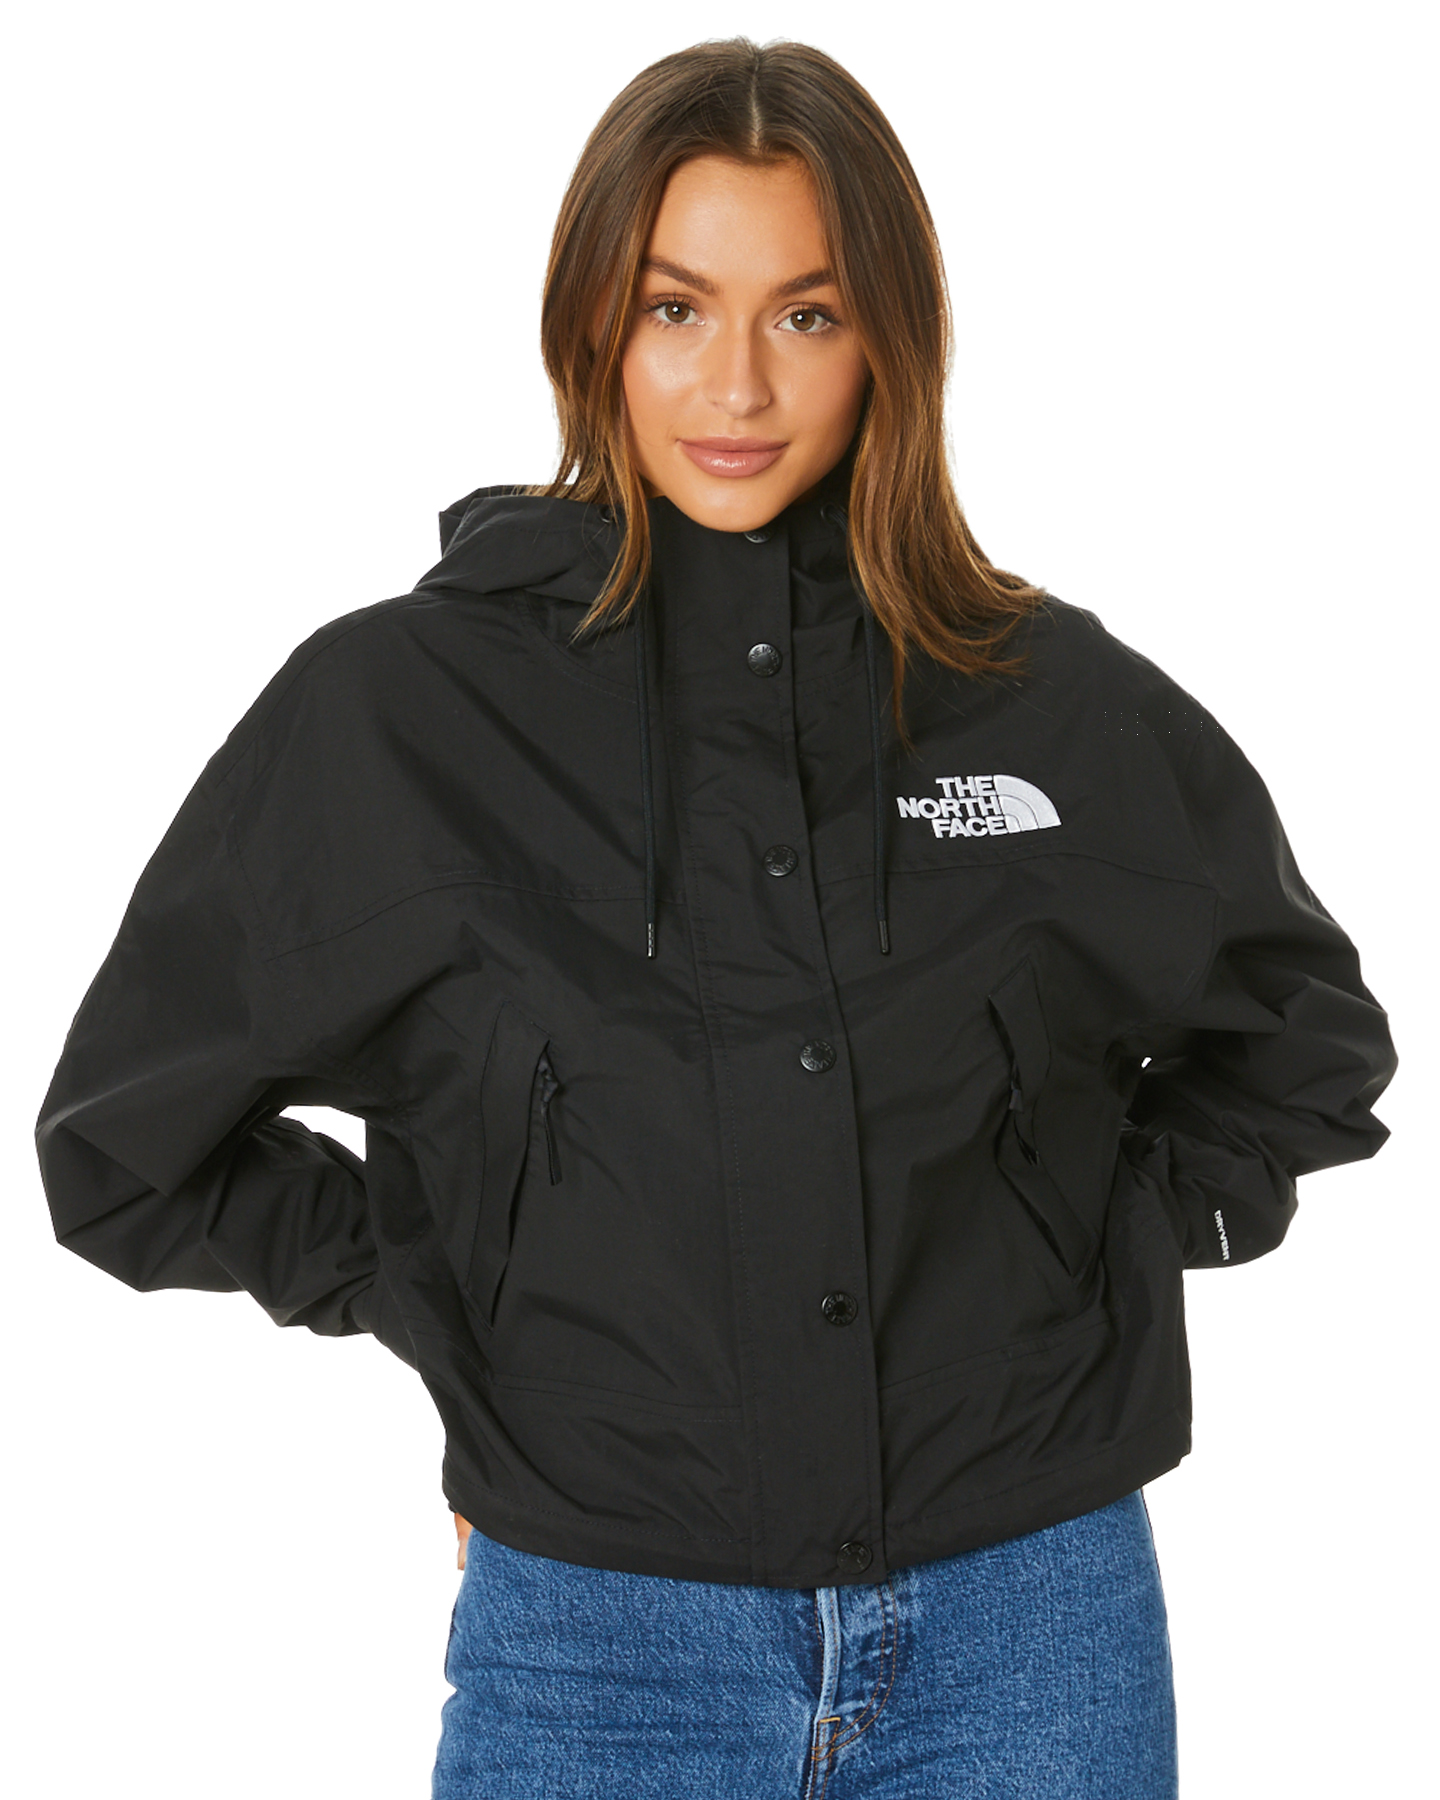 women's north face jackets on sale